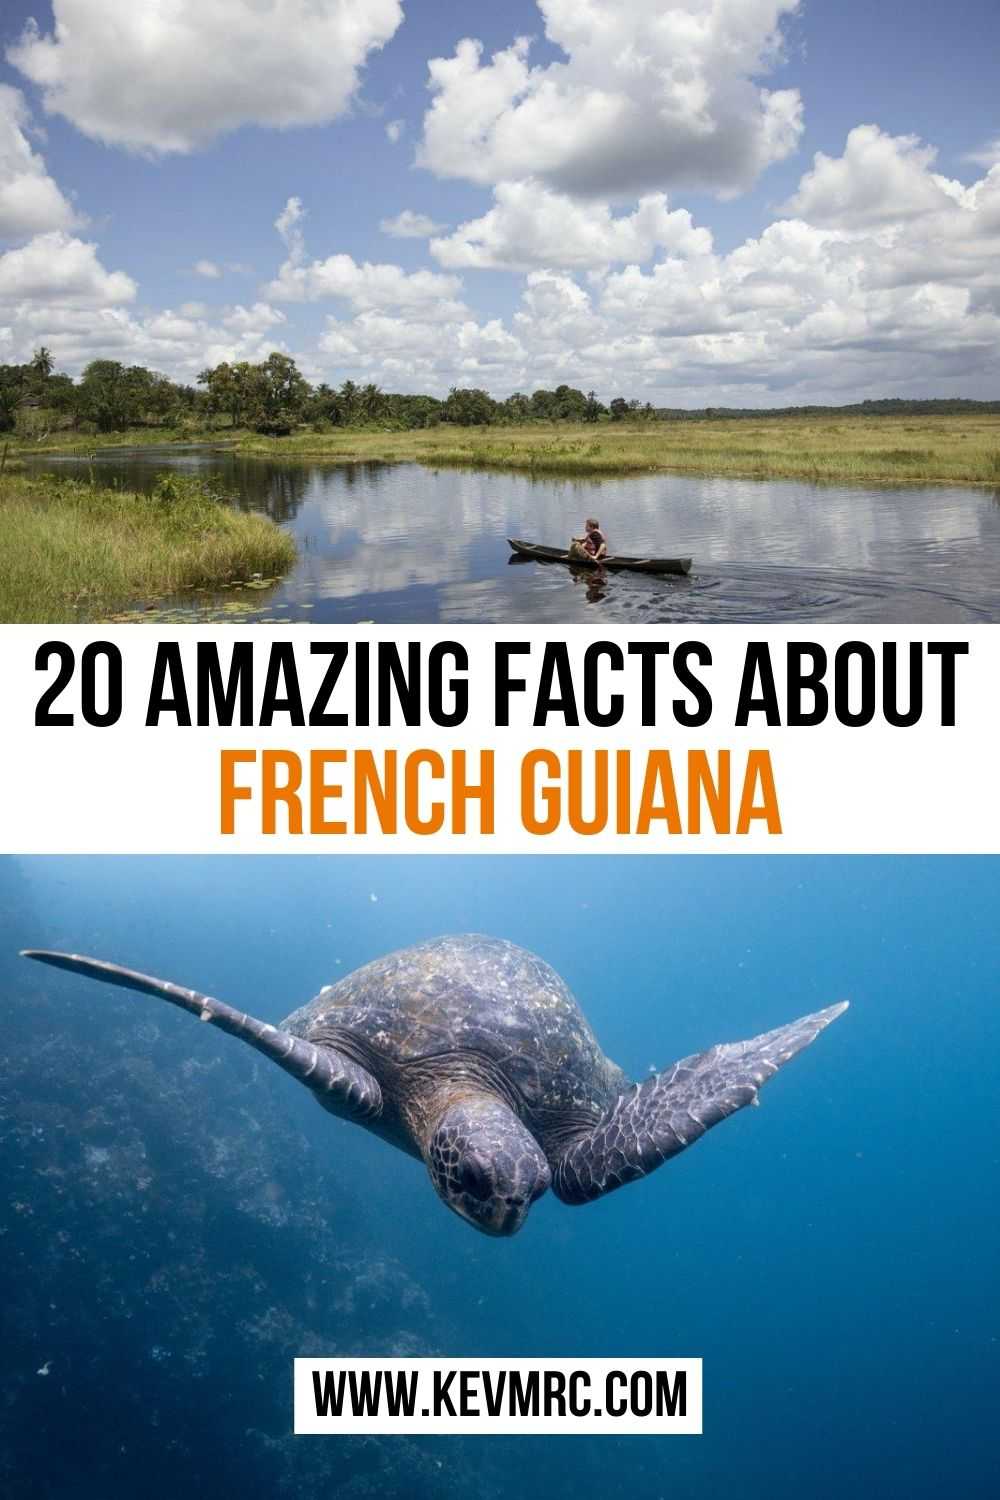 French Guiana is both a region and a French overseas department. Covered by 98% of a dense equatorial forest, which is one of the least ecologically fragmented in the world, French Guiana is home to a rich and diverse fauna and flora. Discover 20 Interesting Facts About French Guiana. france travel guide | travel france #france